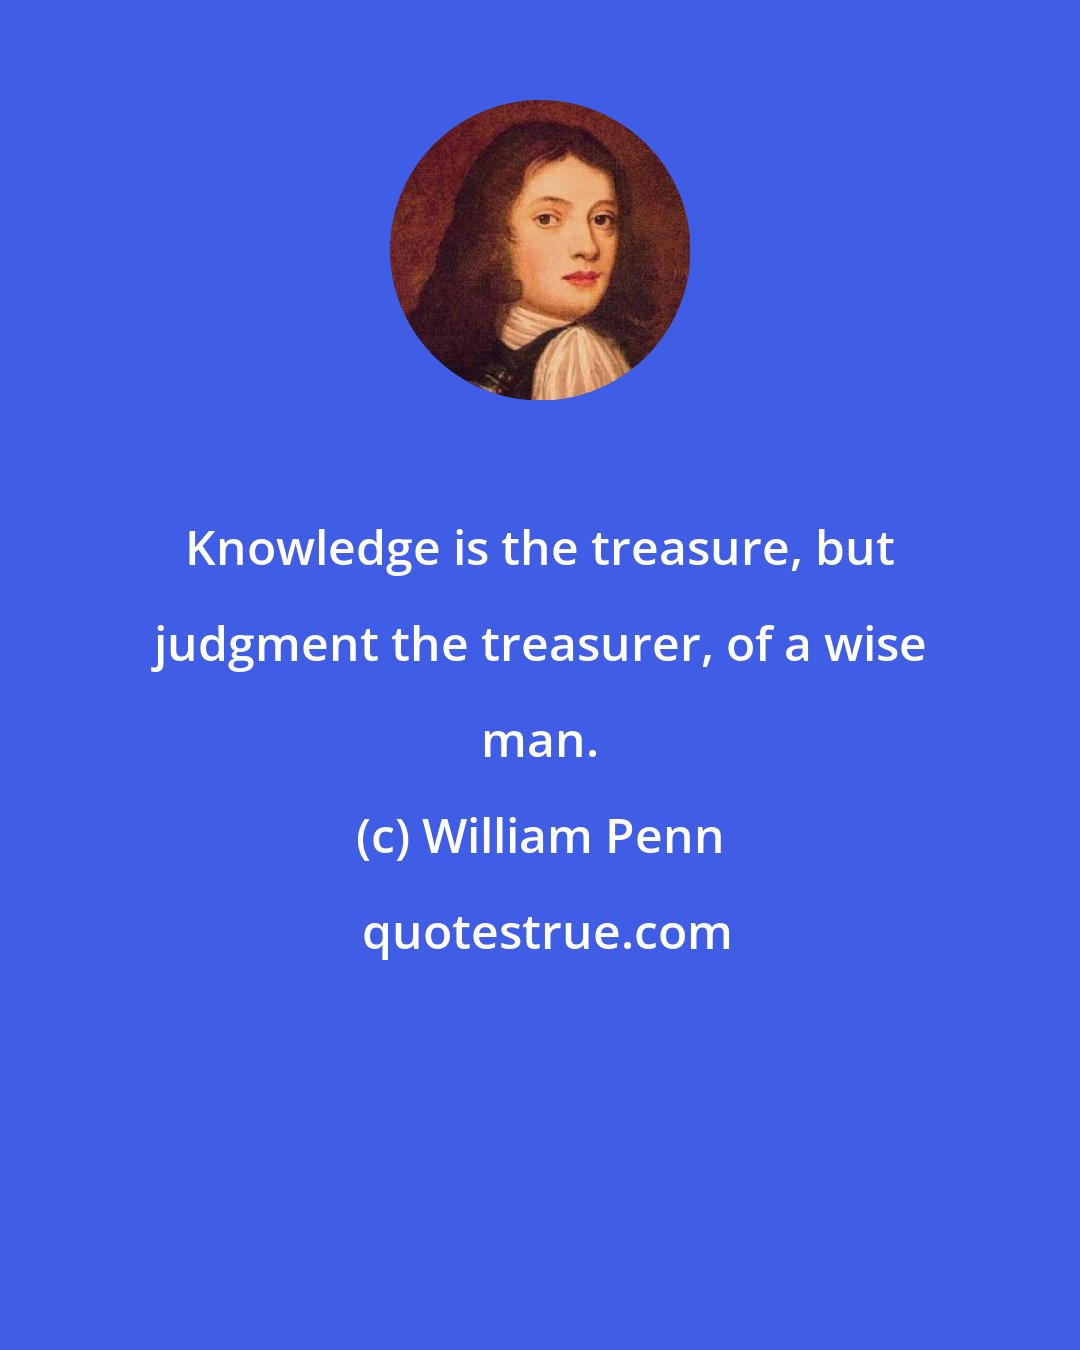 William Penn: Knowledge is the treasure, but judgment the treasurer, of a wise man.